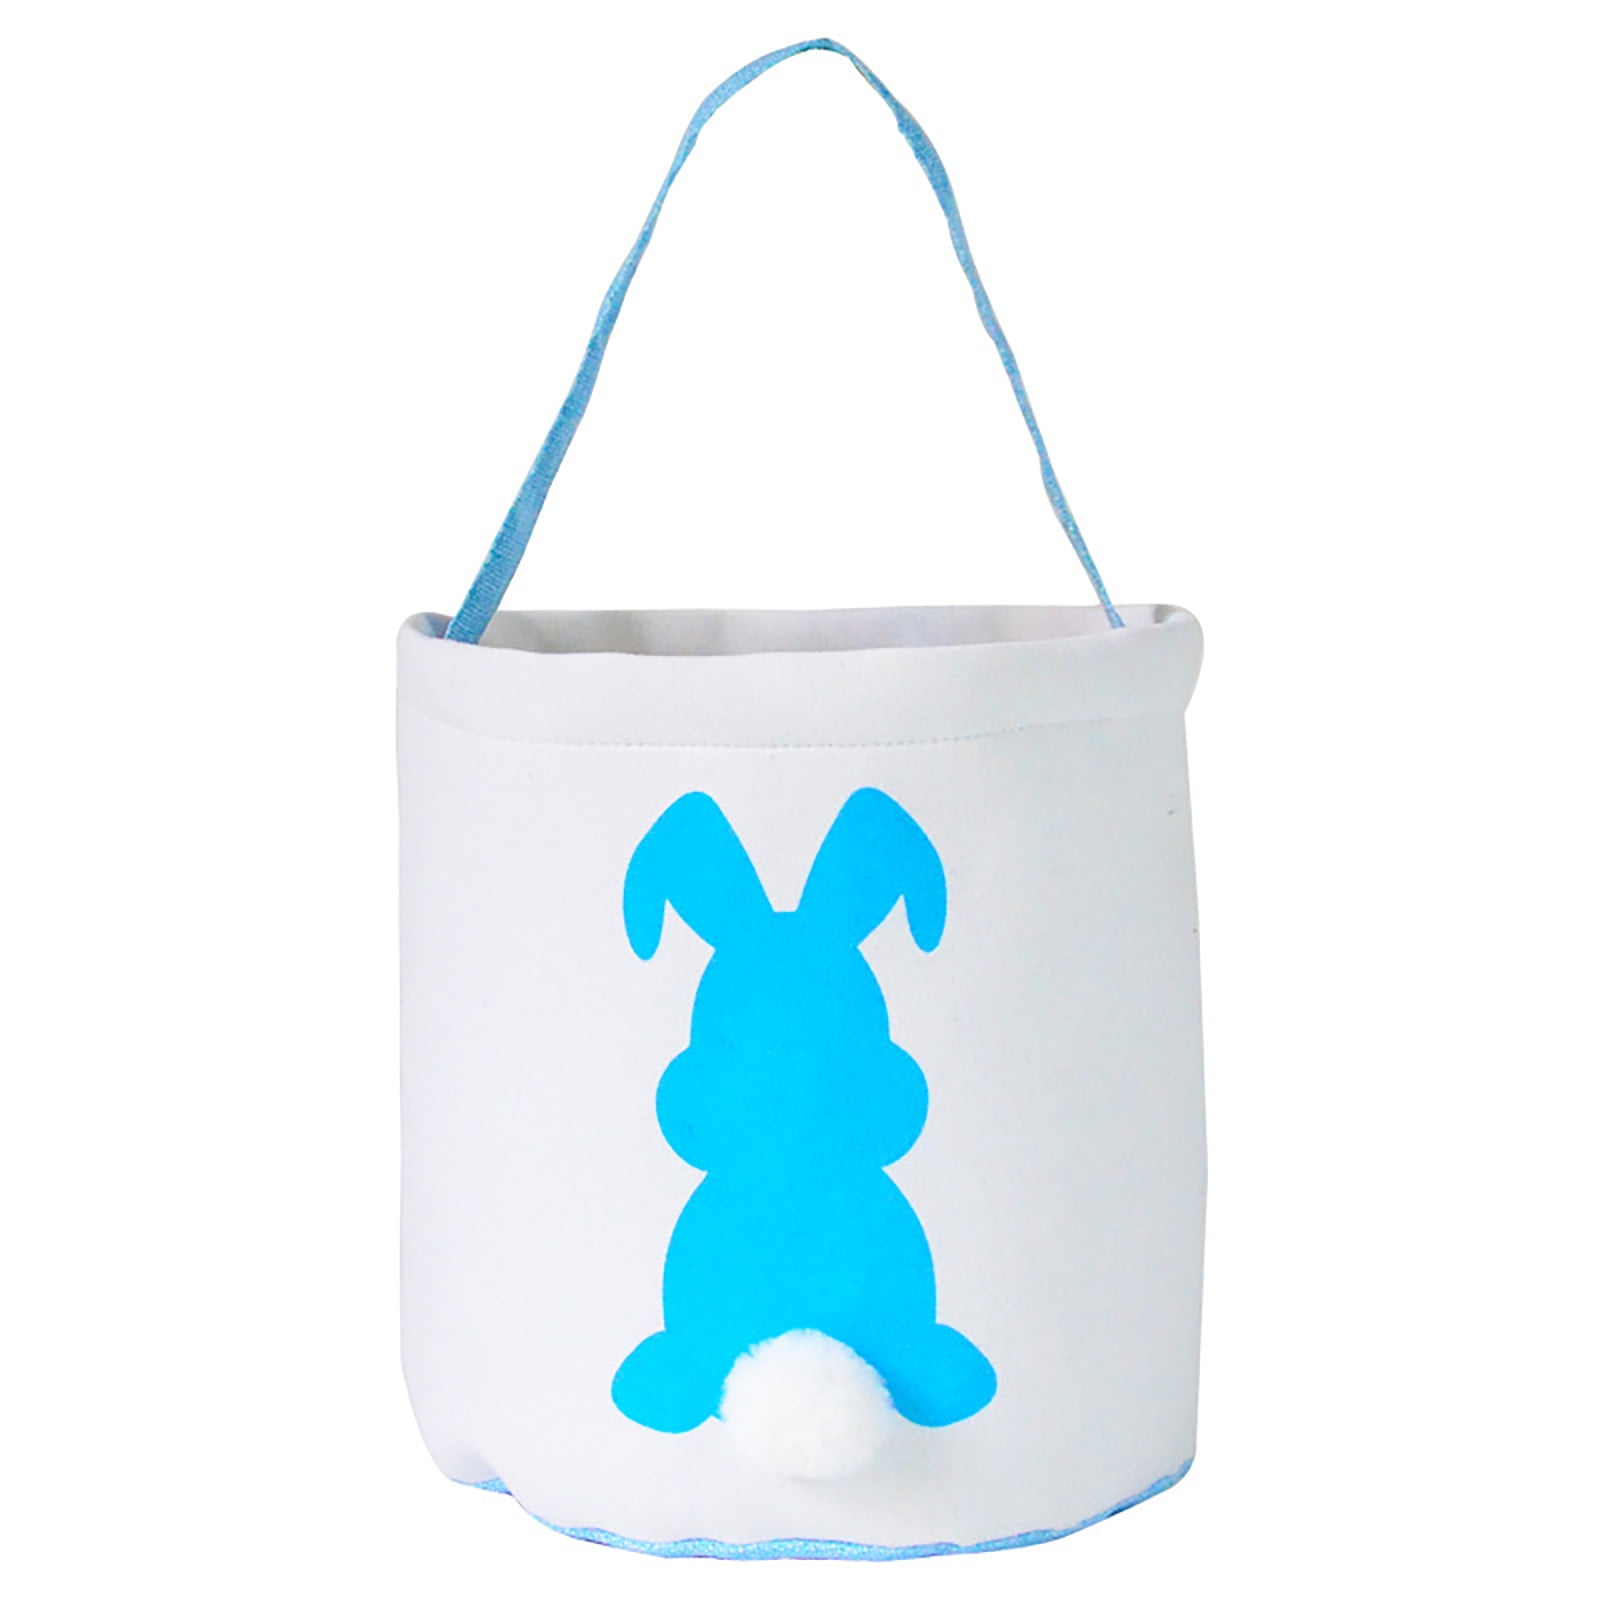 Bunny Canvas Tote Bag Bucket for Easter Eggs Toys Easter Baskets for Kids Candy Gifts Easter Bunny Basket Bags 